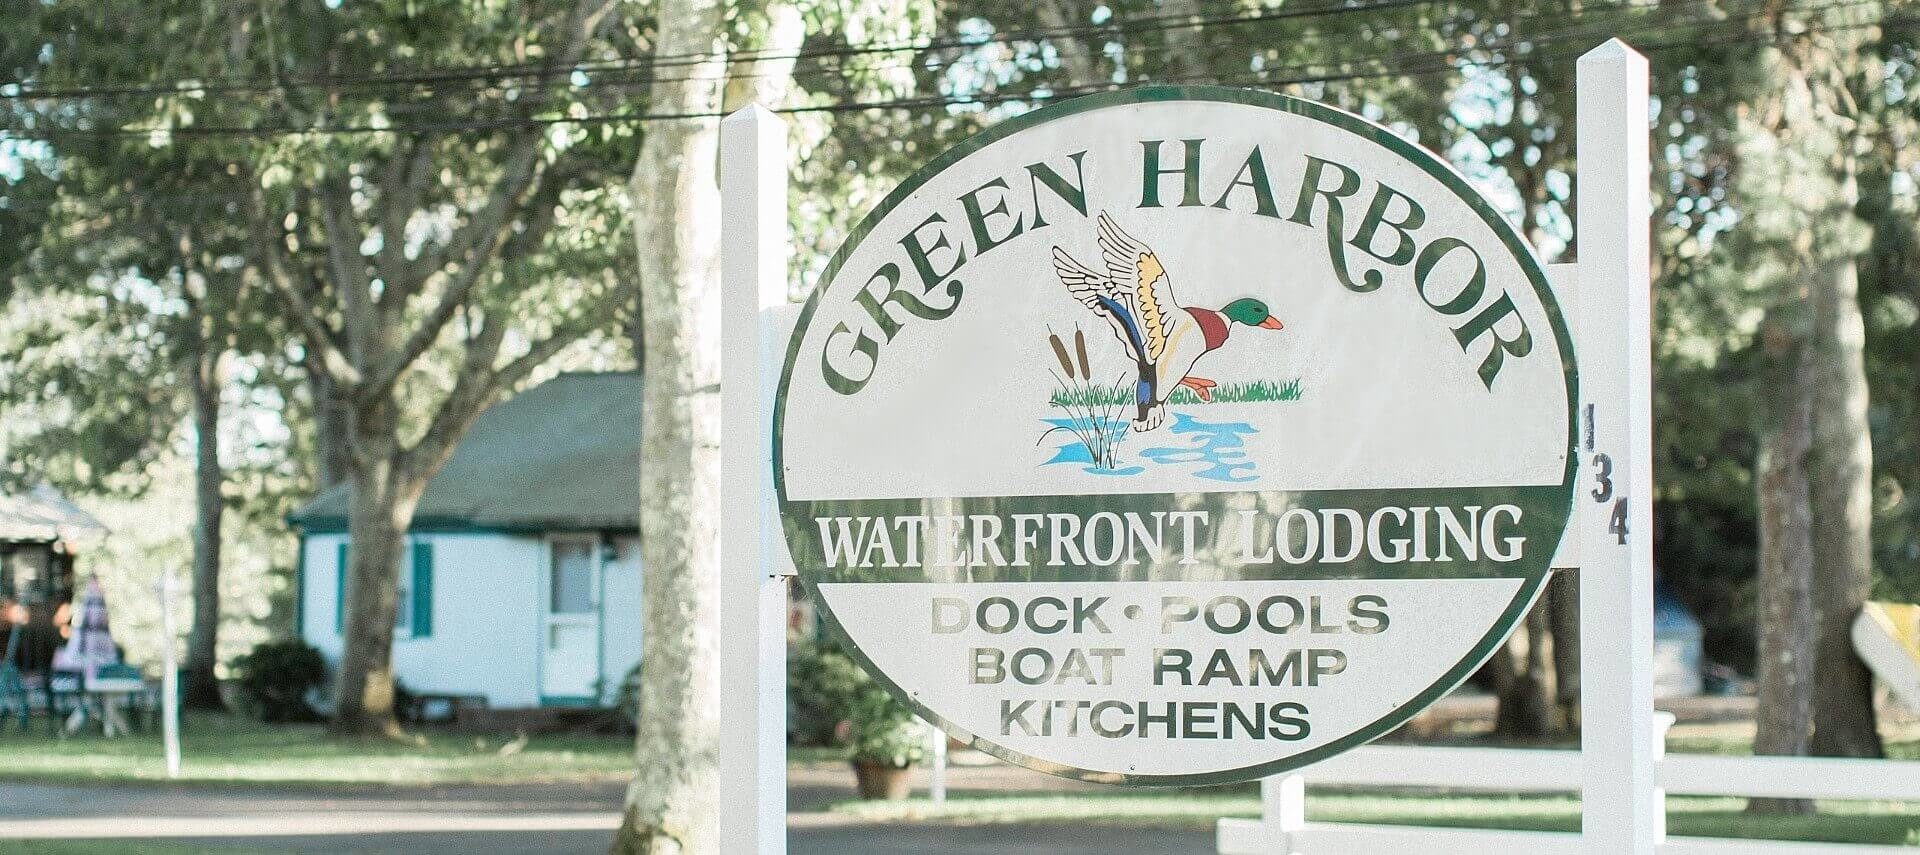 White oval business sign with green text and picture of a duck over water